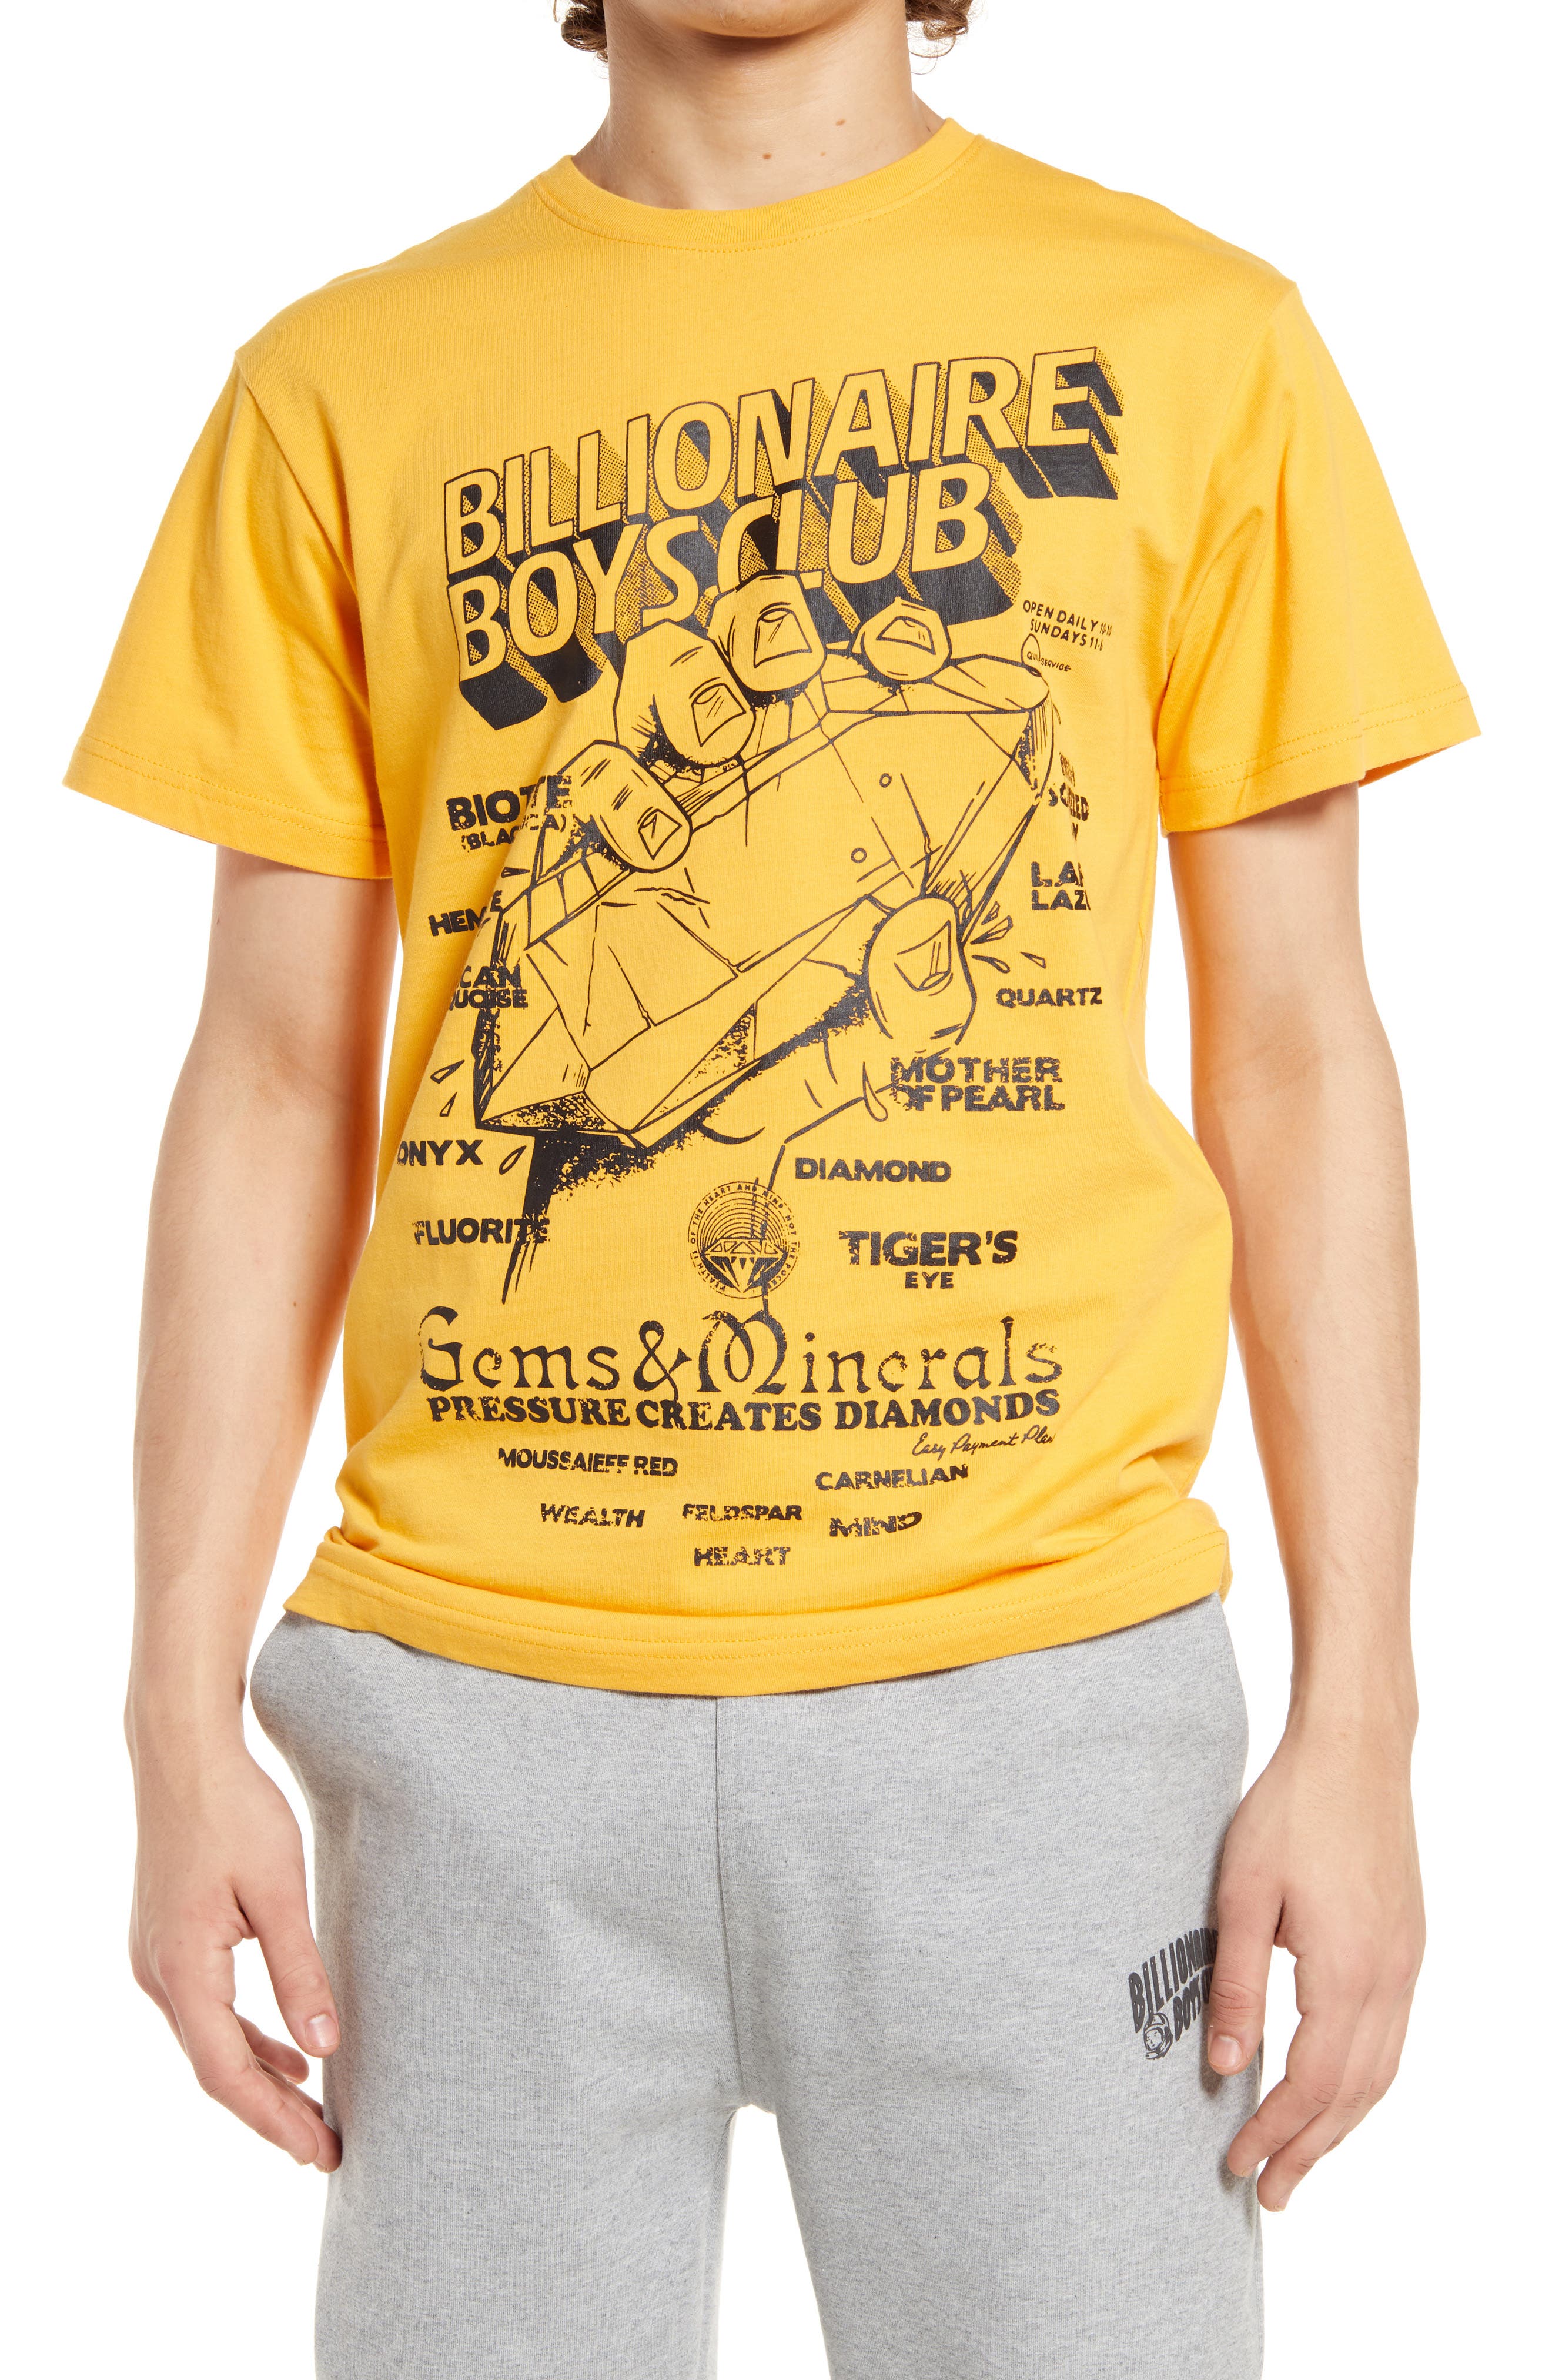 Billionaire Boys Club BB Pressed Diamonds Graphic Tee in Beeswax at Nordstrom, Size Small